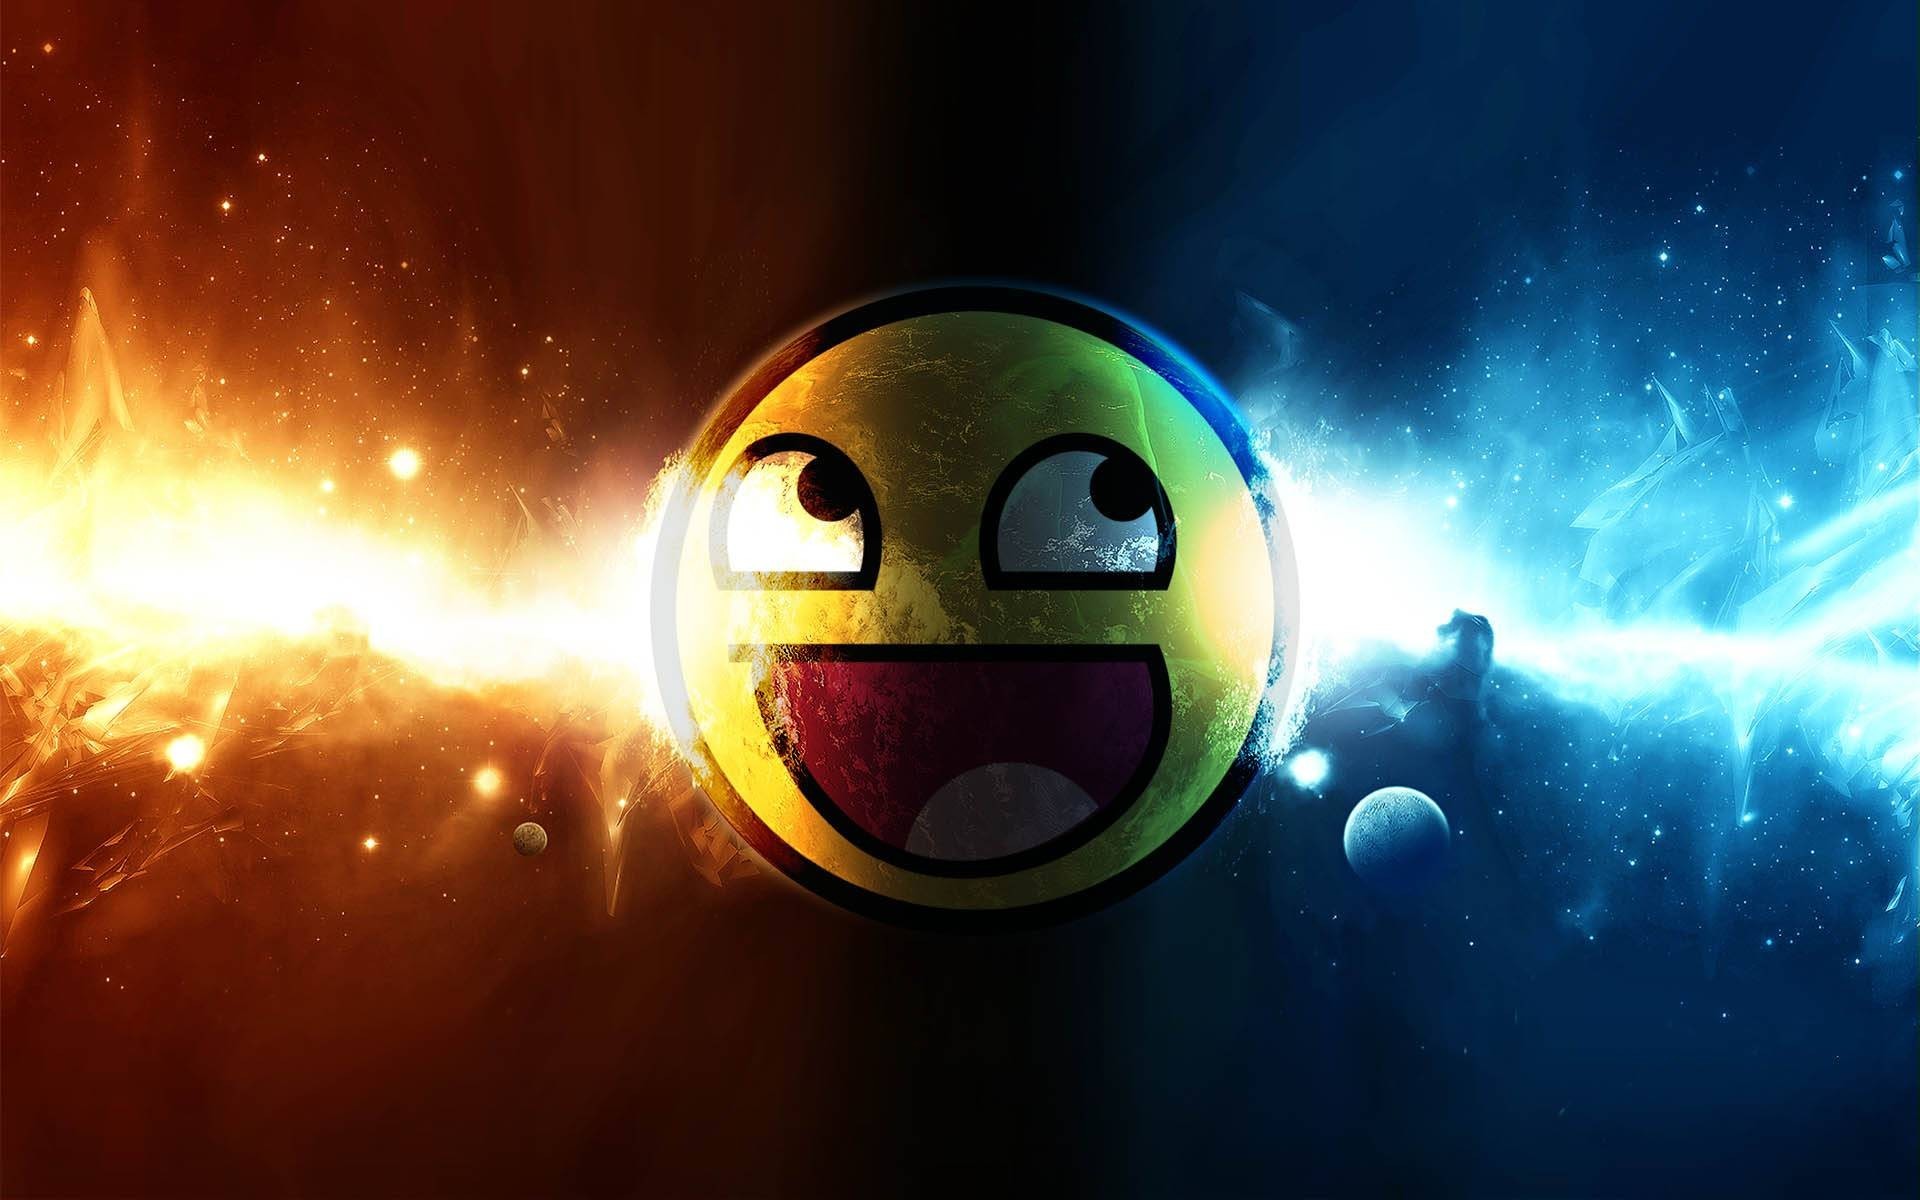 1920x1200  Cool 3D Smiley Background Free Wallpapers #7937 | HD Wallpaper &  3D .